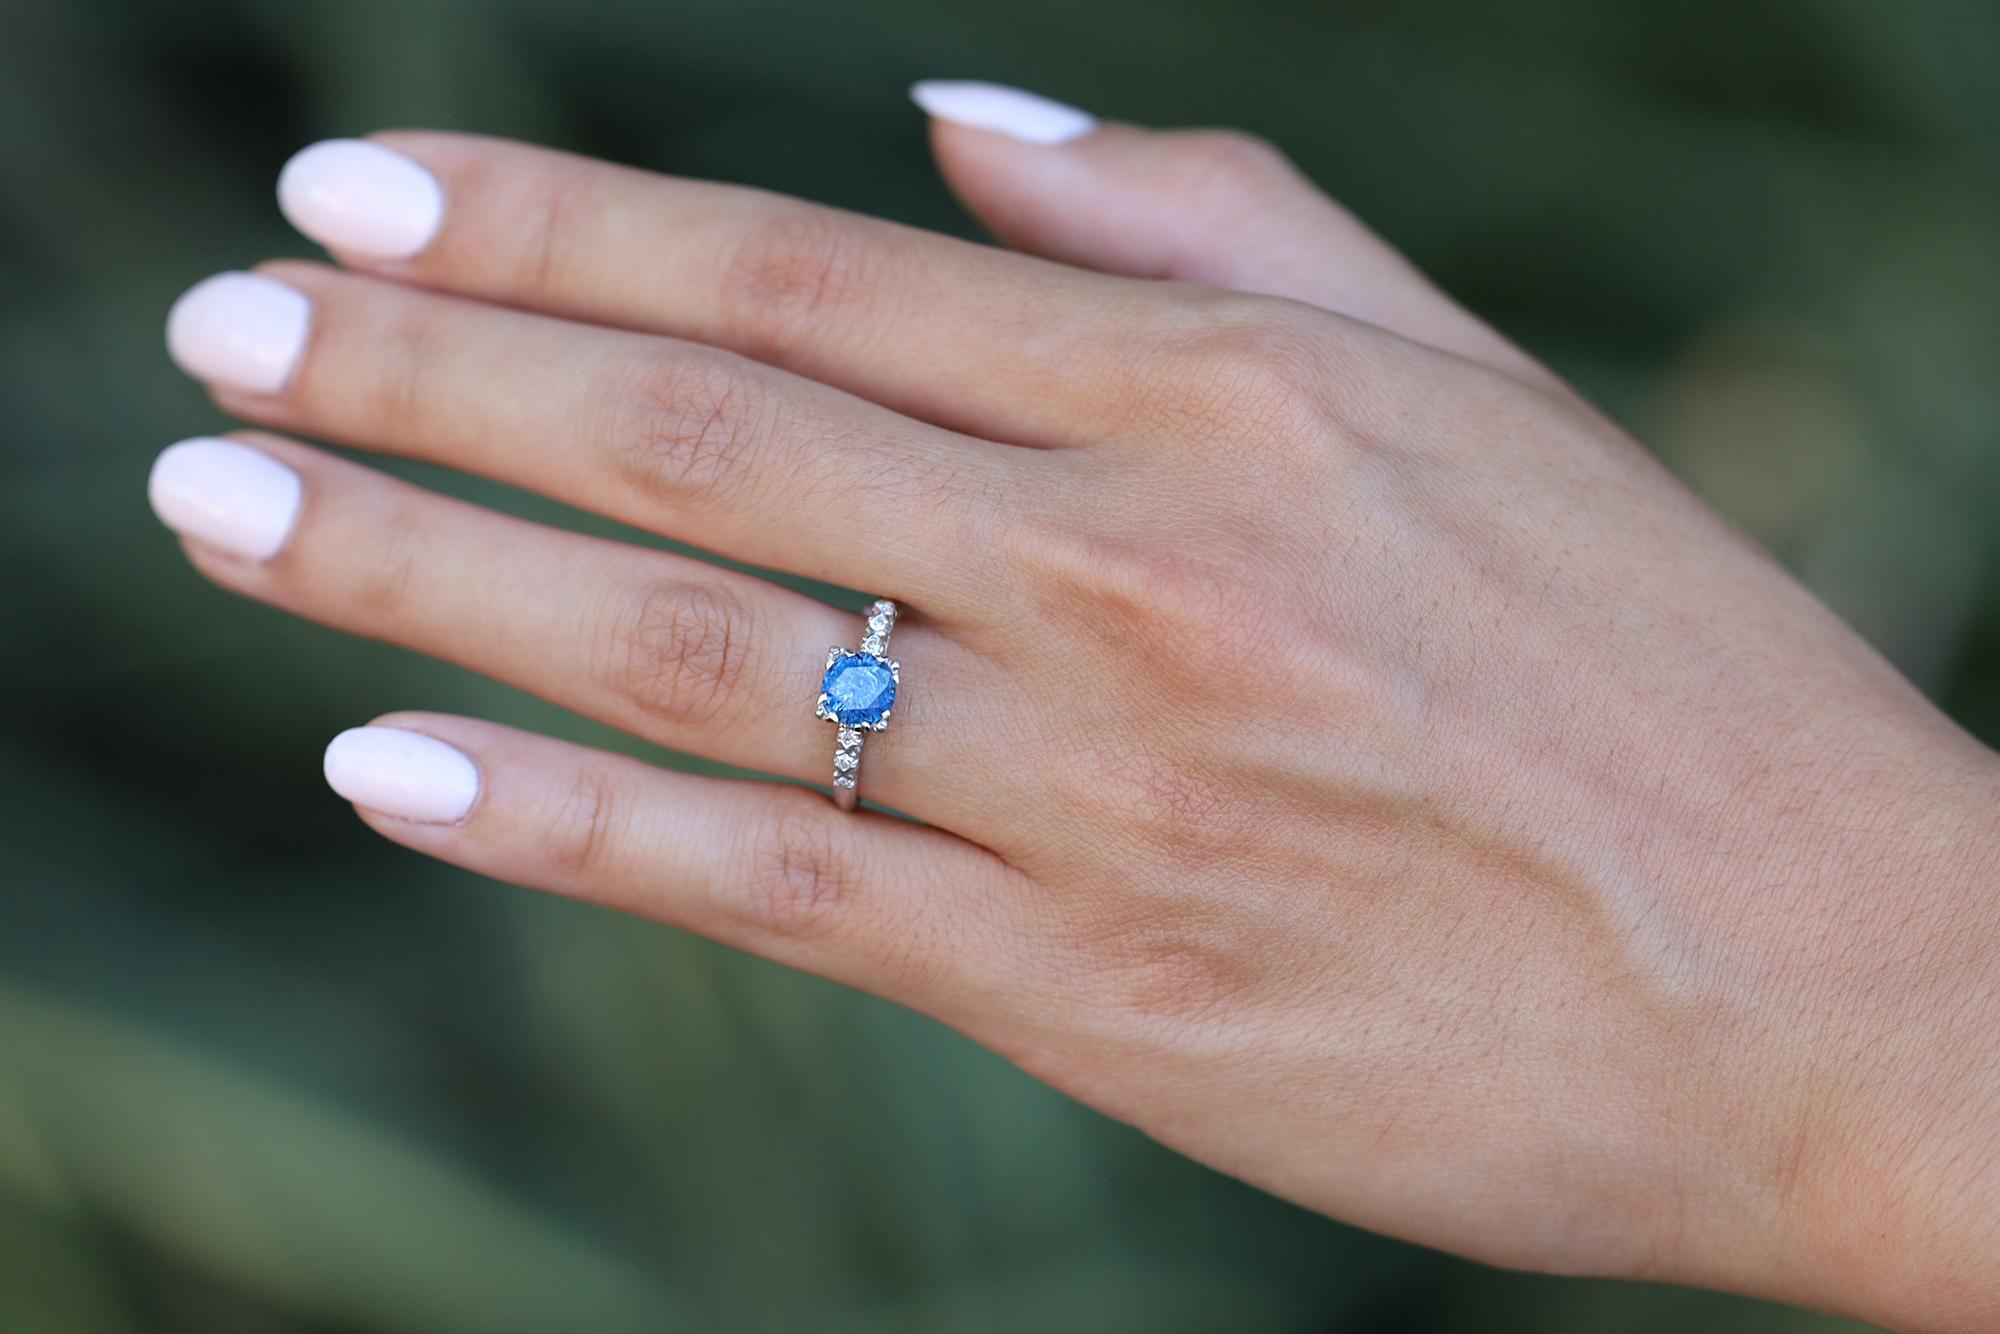 An authentic antique, this affordable sapphire engagement ring was skillfully handcrafted during the 1920s Art Deco era. This lovely heirloom features a velvety-blue sapphire solitaire weighing 1 carat, perched in an enduring platinum setting. The